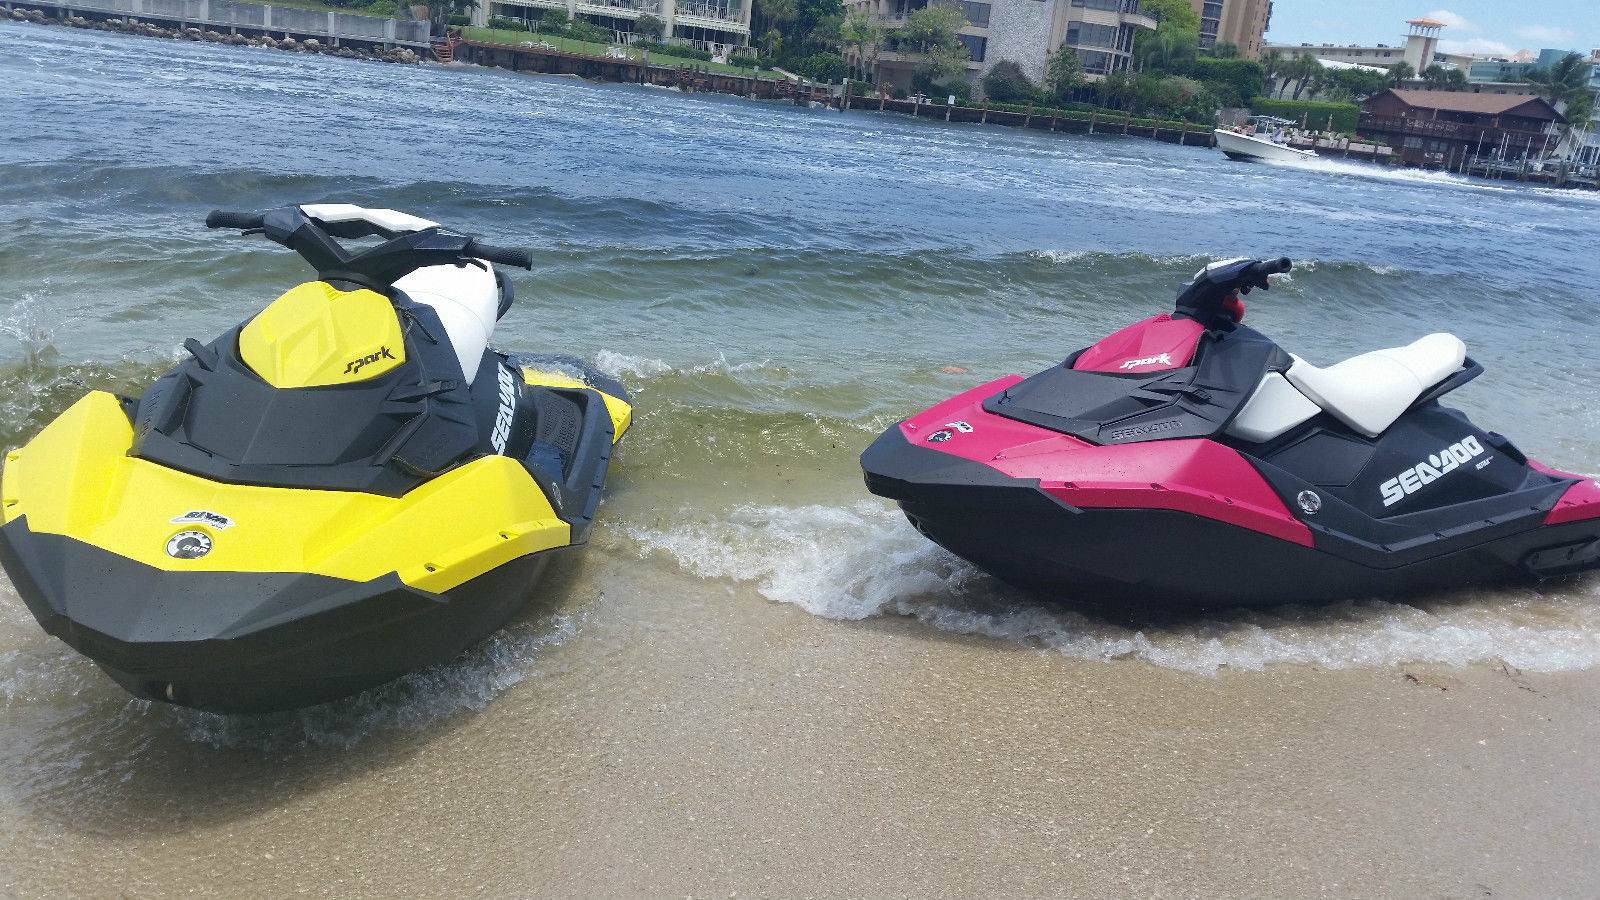 Sea Doo Spark 2014 for sale for $12,500 - Boats-from-USA.com